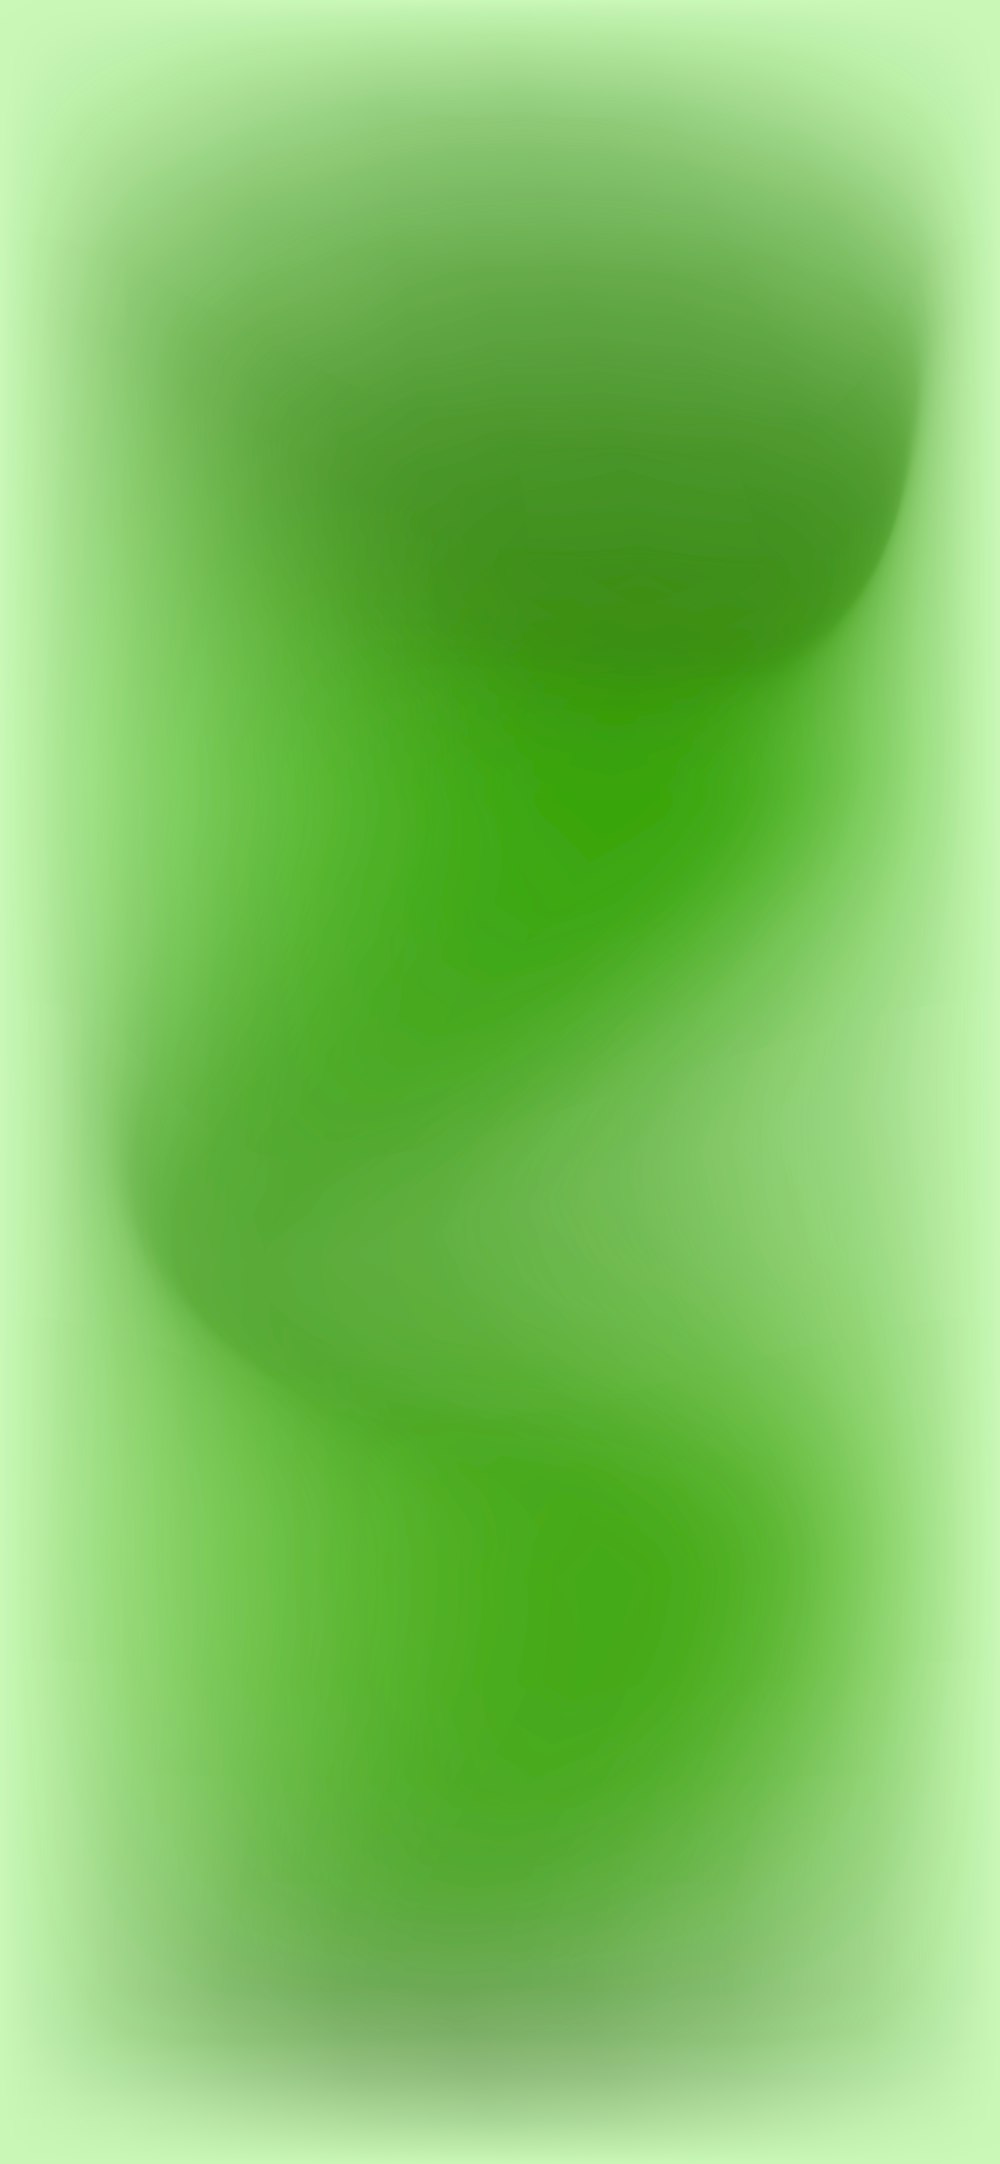 a blurry image of a green background